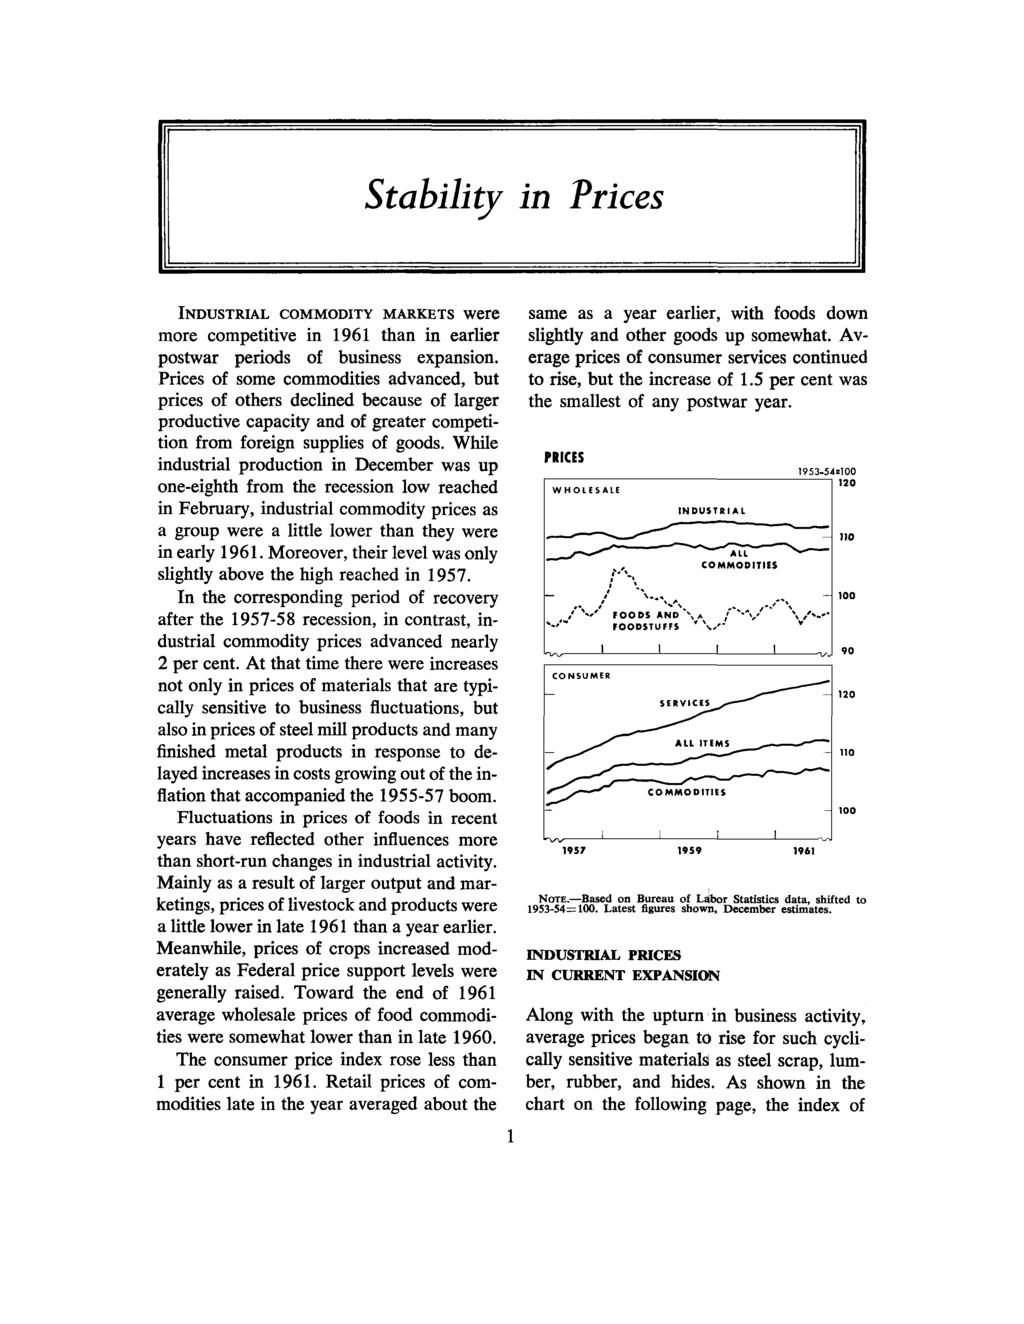 Stability in Prices INDUSTRIAL COMMODITY MARKETS were more competitive in 1961 than in earlier postwar periods of business expansion.